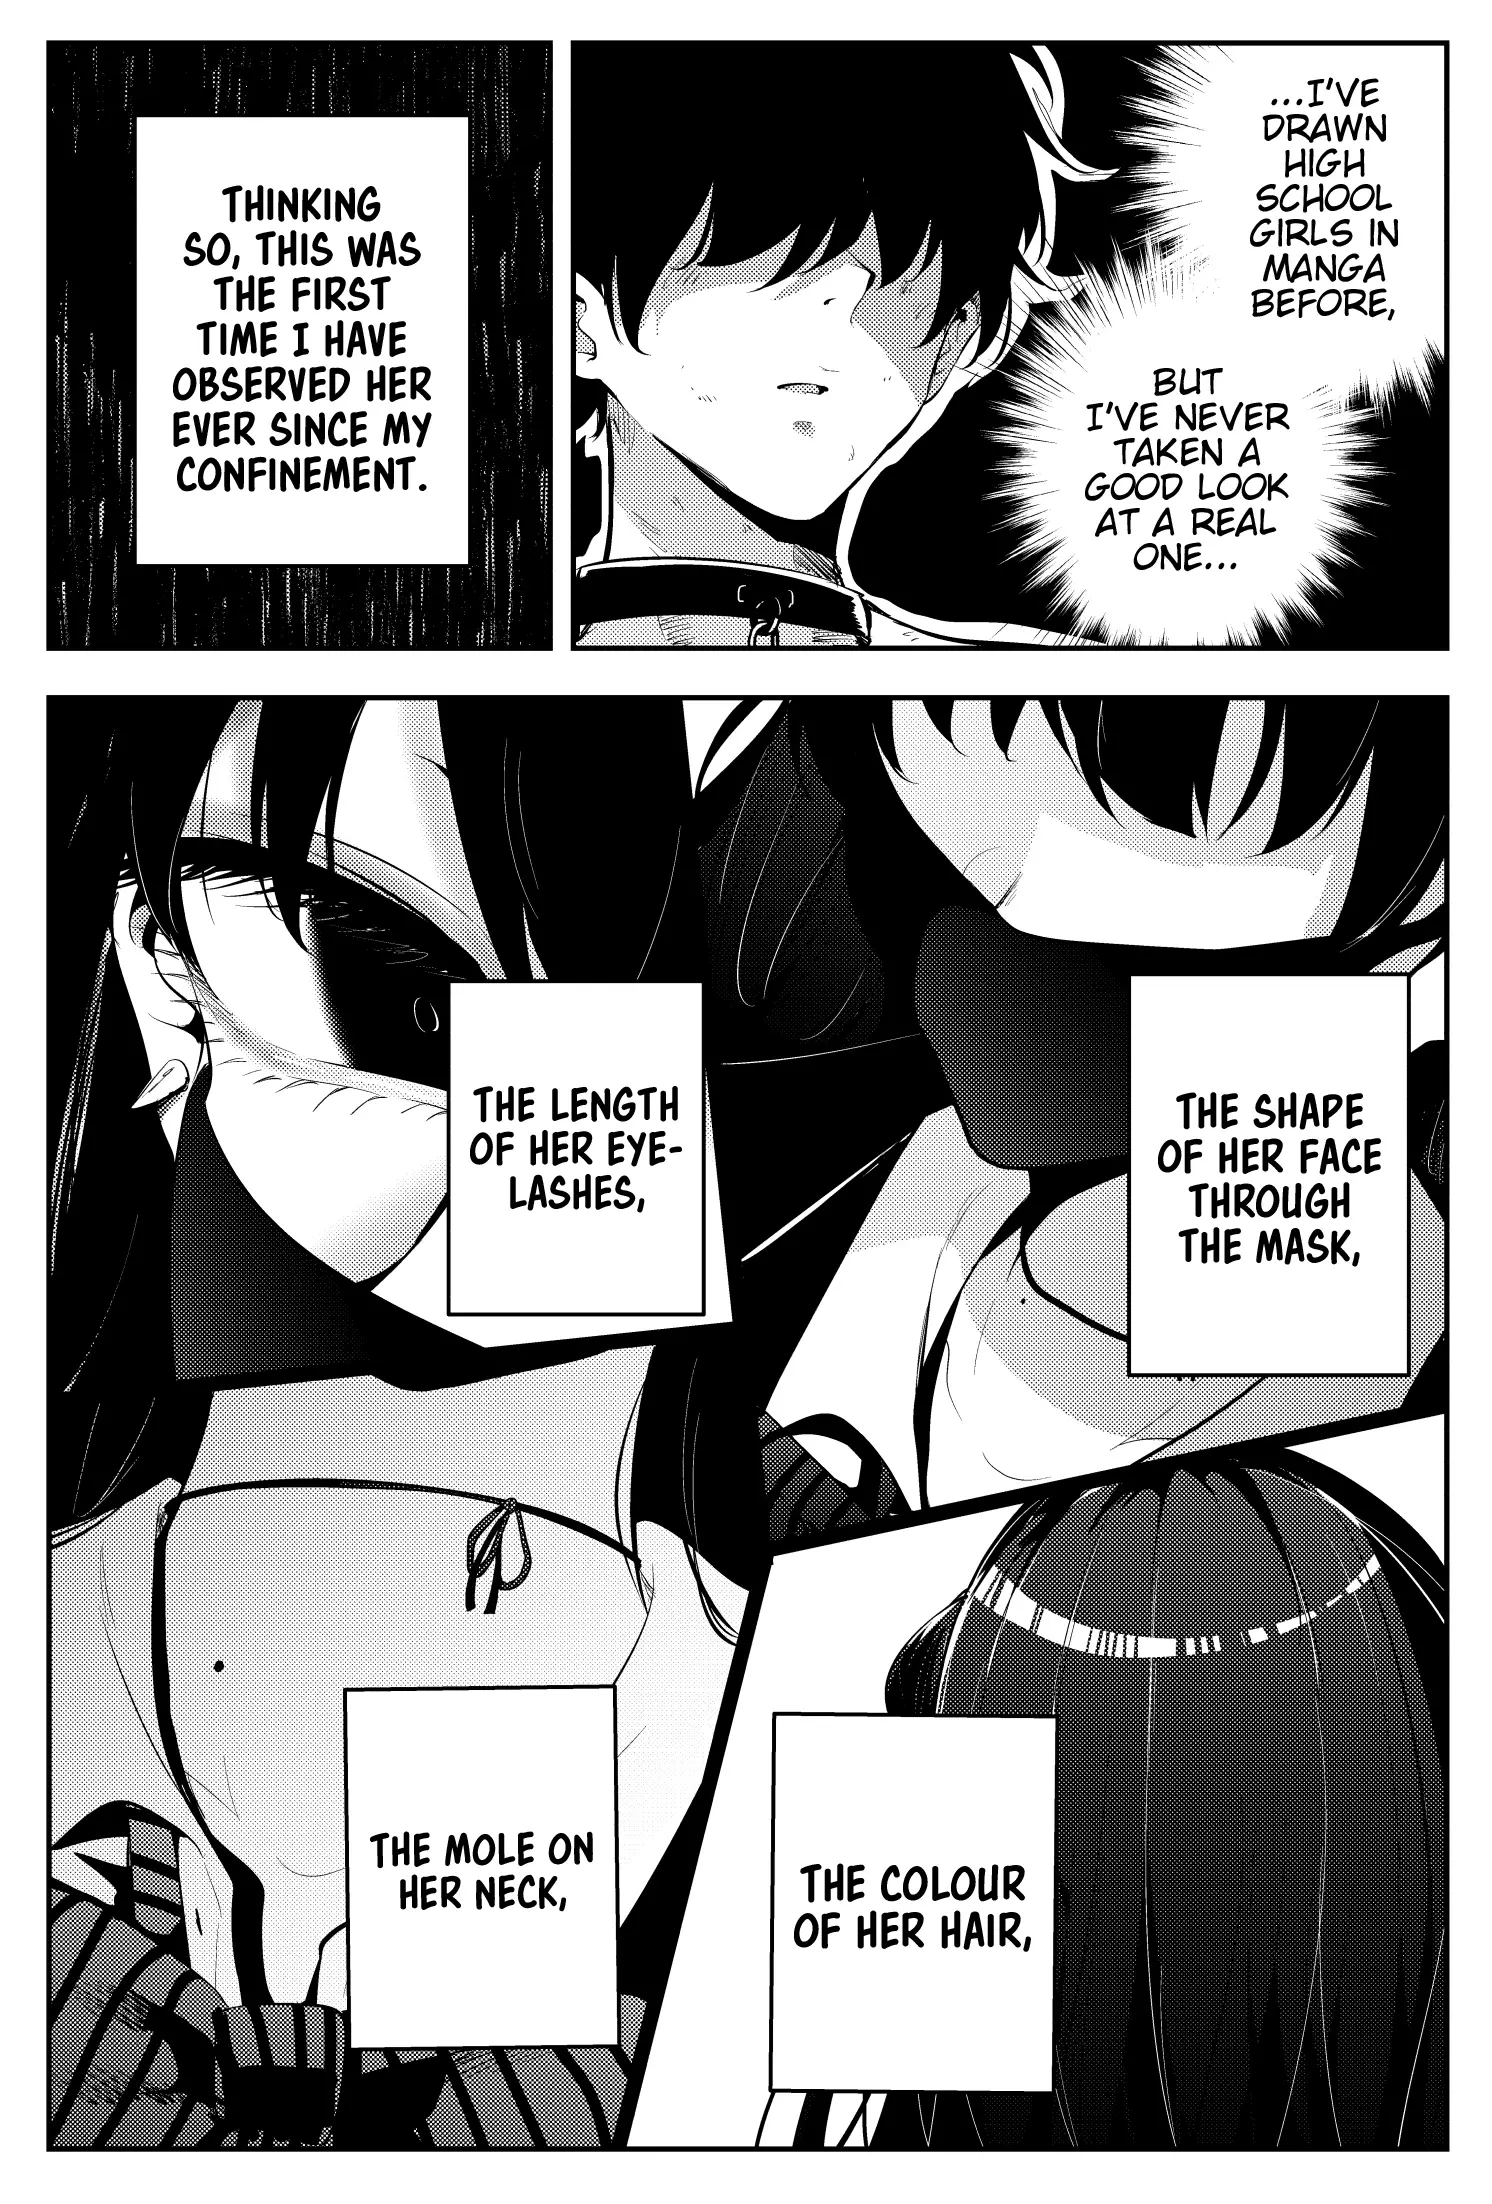 The Story Of A Manga Artist Confined By A Strange High School Girl - 3 page 3-24963bc3